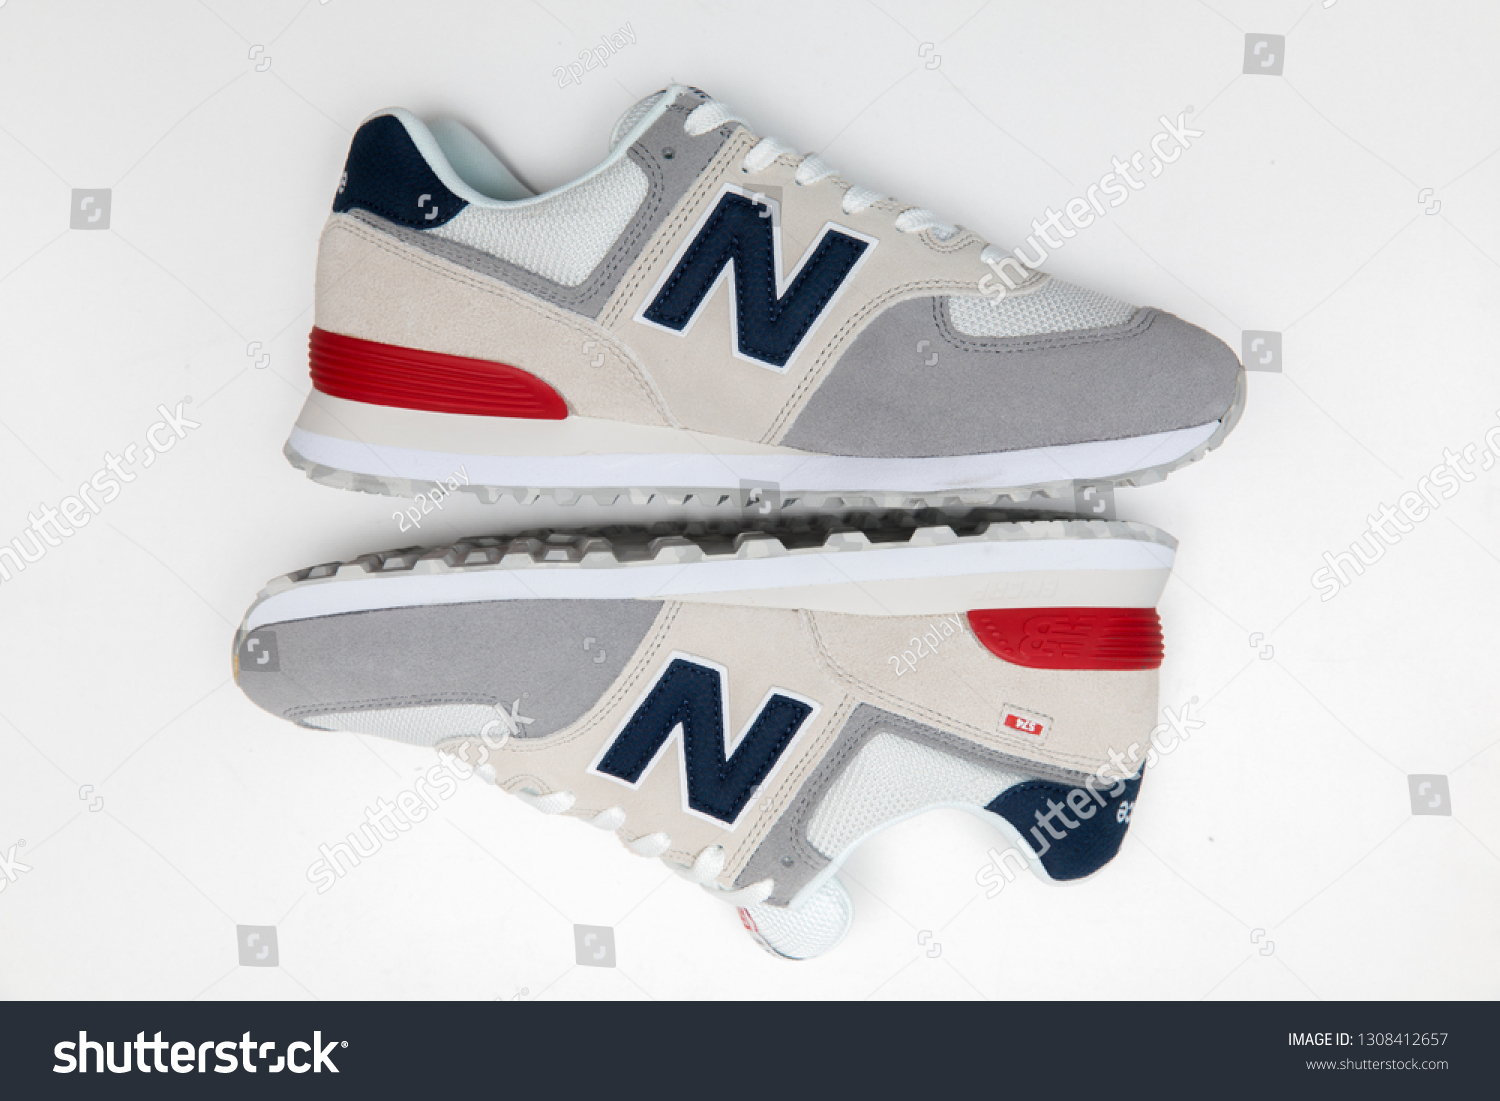 new balance womens shoes thailand